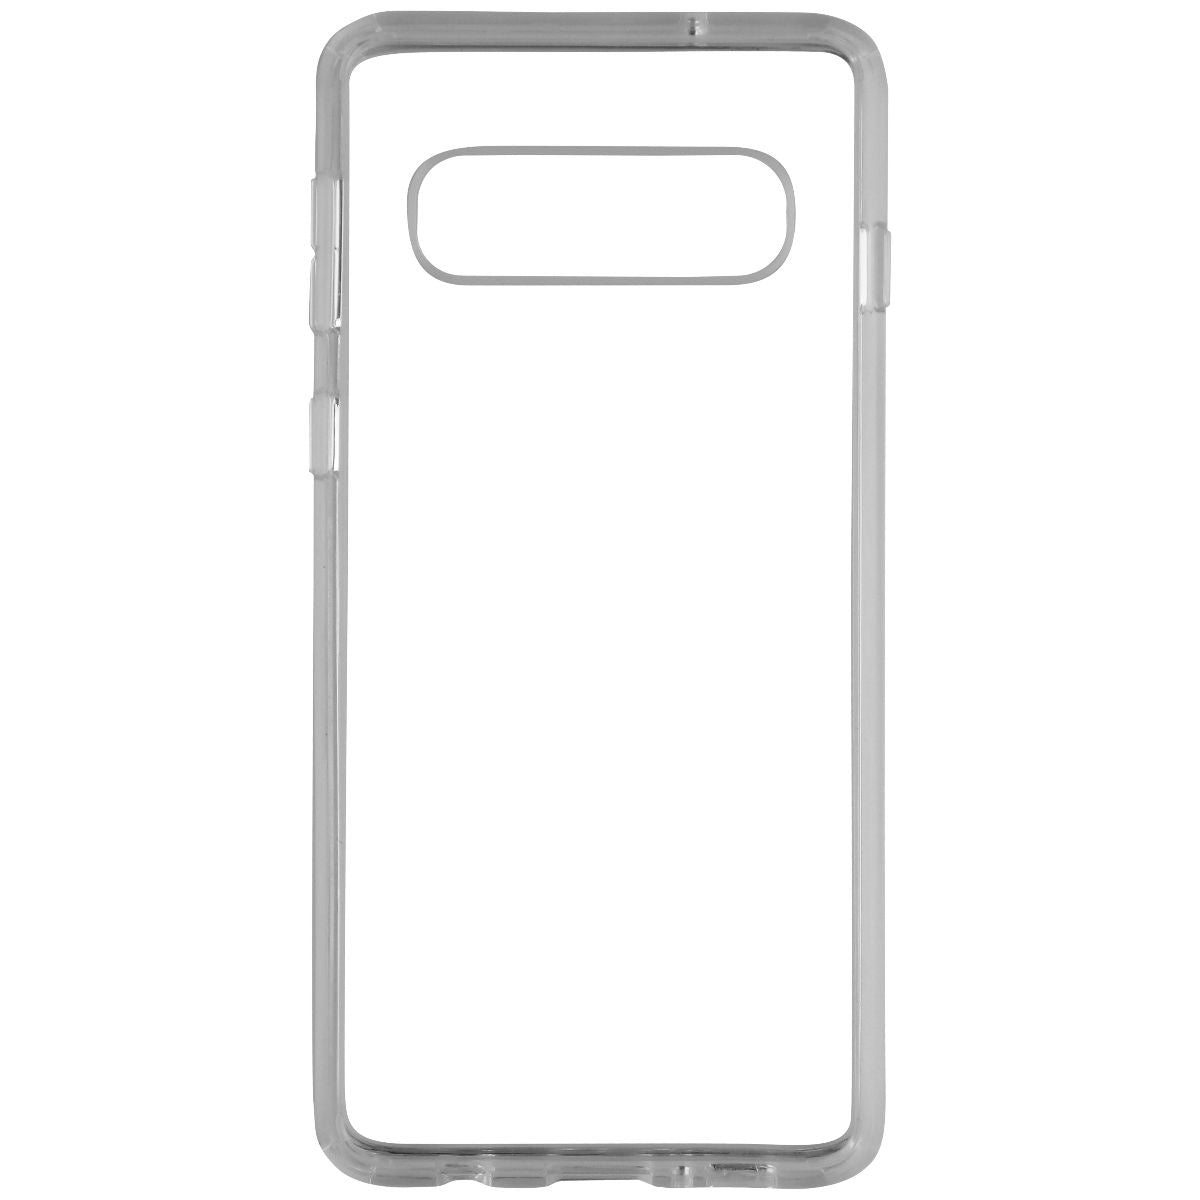 UBREAKIFIX Hard-shell Case for Samsung Galaxy S10 - Clear Cell Phone - Cases, Covers & Skins UBREAKIFIX    - Simple Cell Bulk Wholesale Pricing - USA Seller